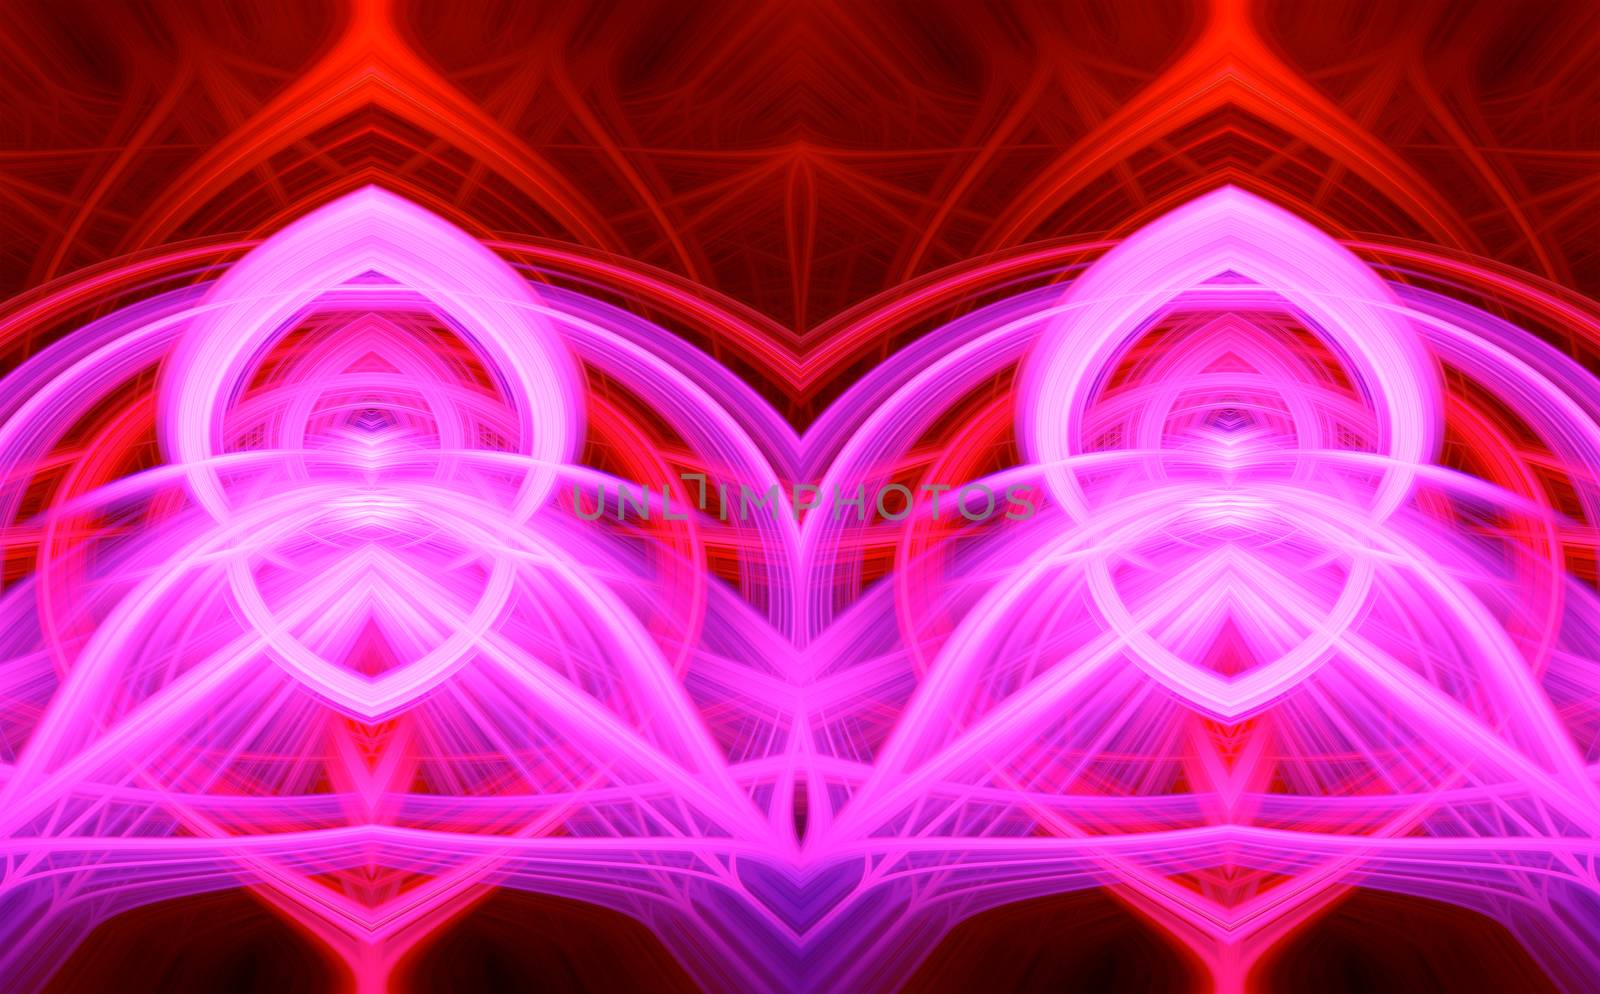 Beautiful abstract intertwined glowing 3d fibers forming a shape of pointy domes, sparkle, flame, flower, interlinked hearts. Purple, maroon, pink, and red colors. Illustration by DamantisZ